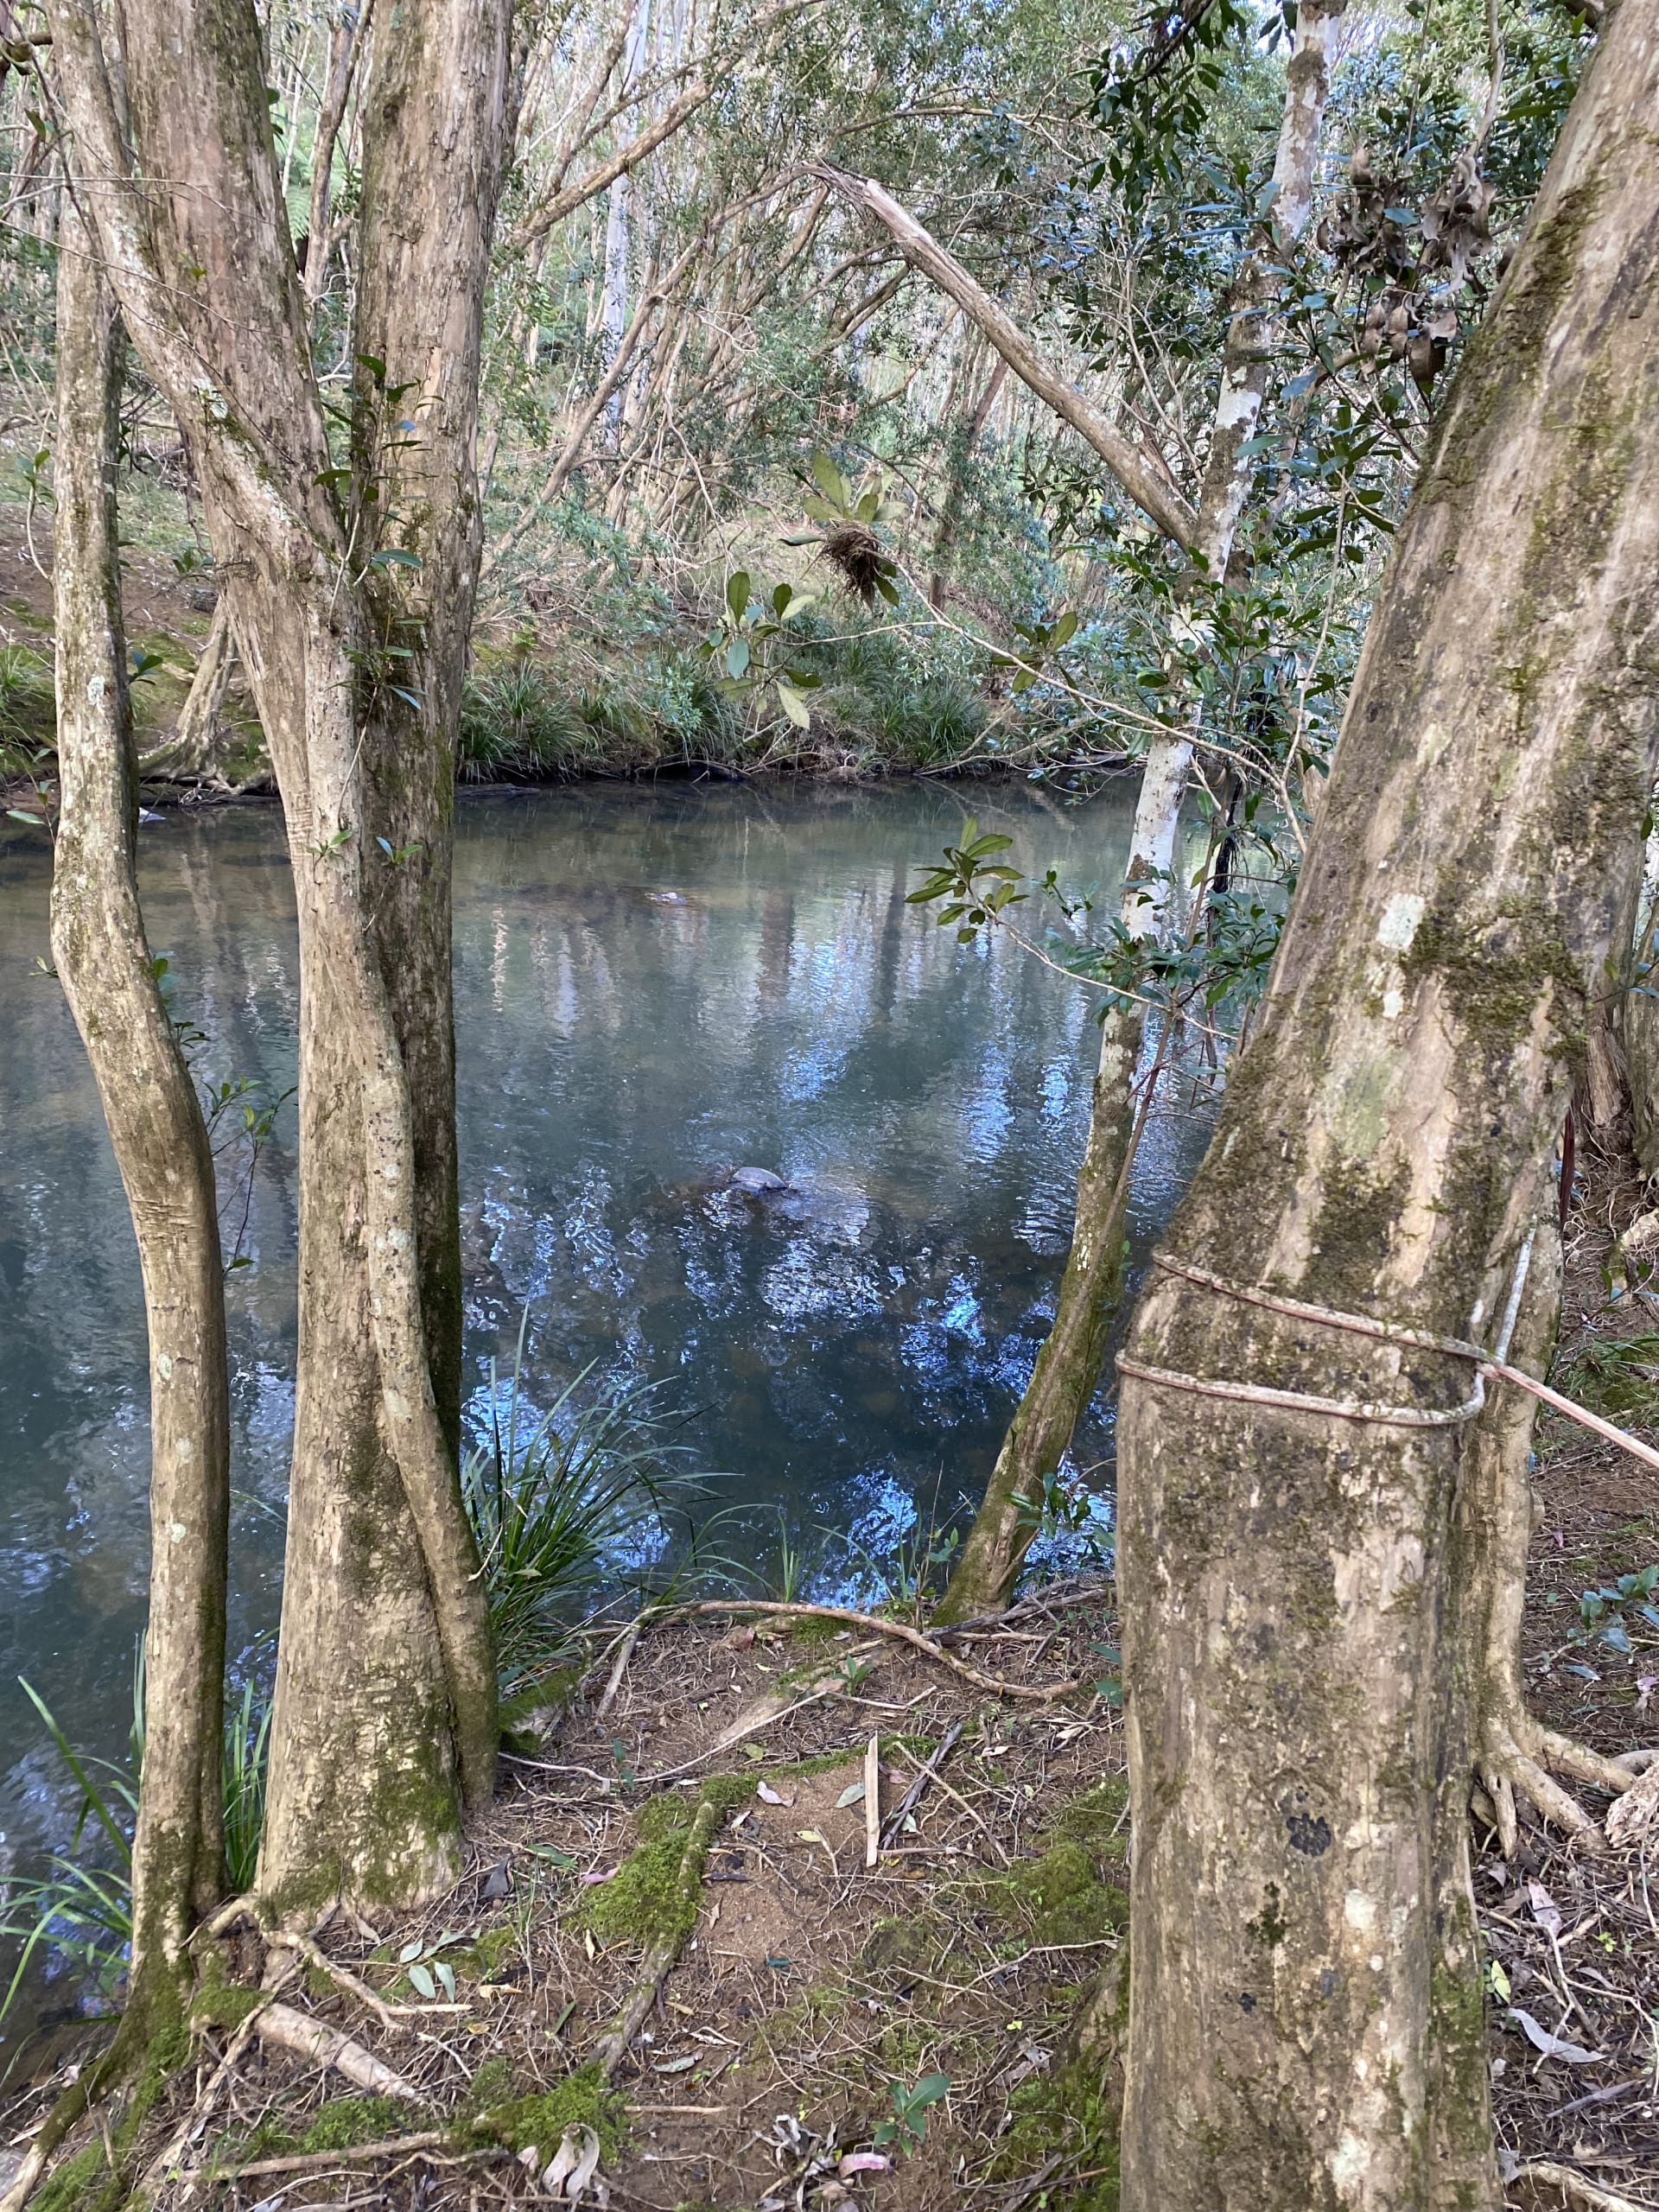 The river at 'the river flat'